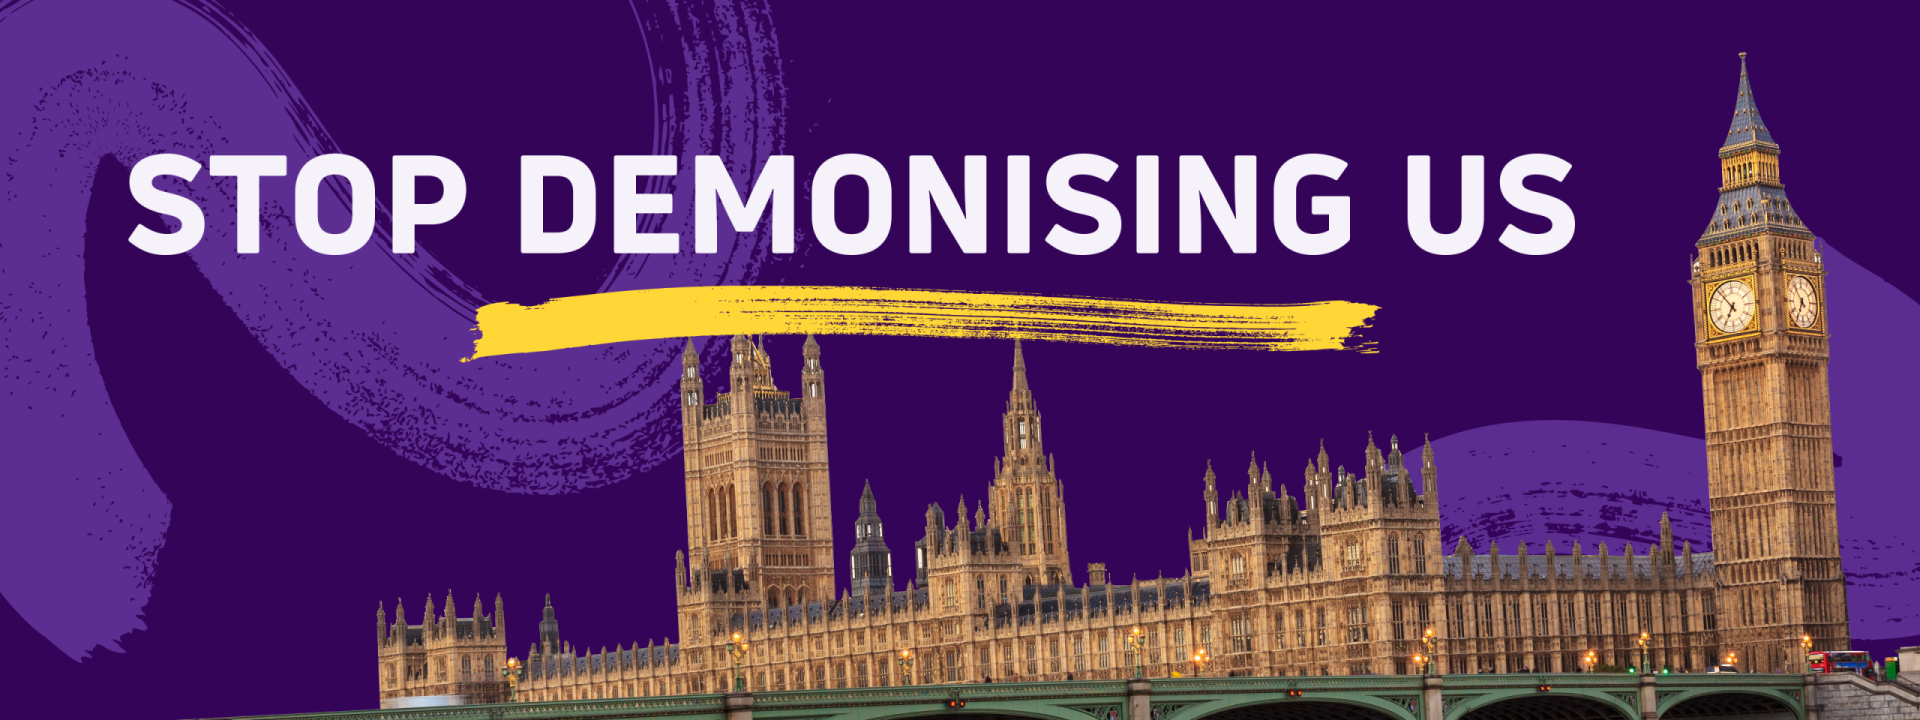 "Stop demonising us" on a purple background, with the Houses of Parliament.